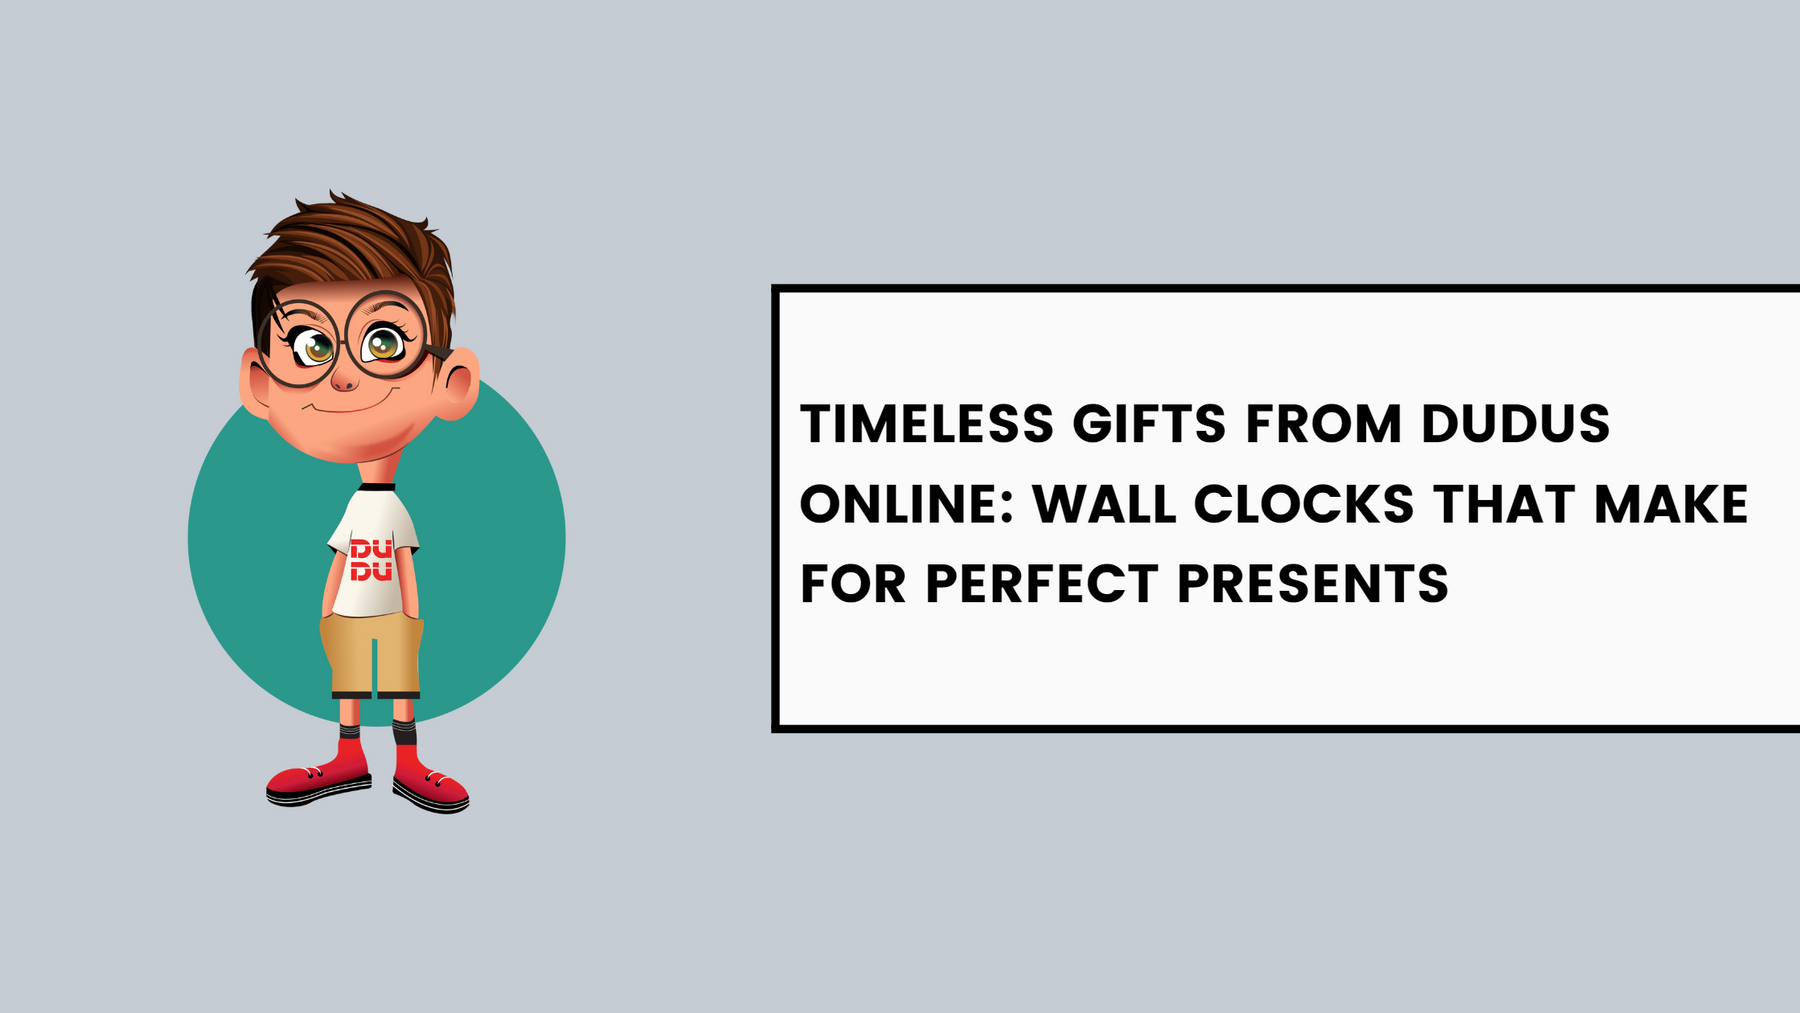 Timeless Gifts from Dudus Online: Wall Clocks that Make for Perfect Presents